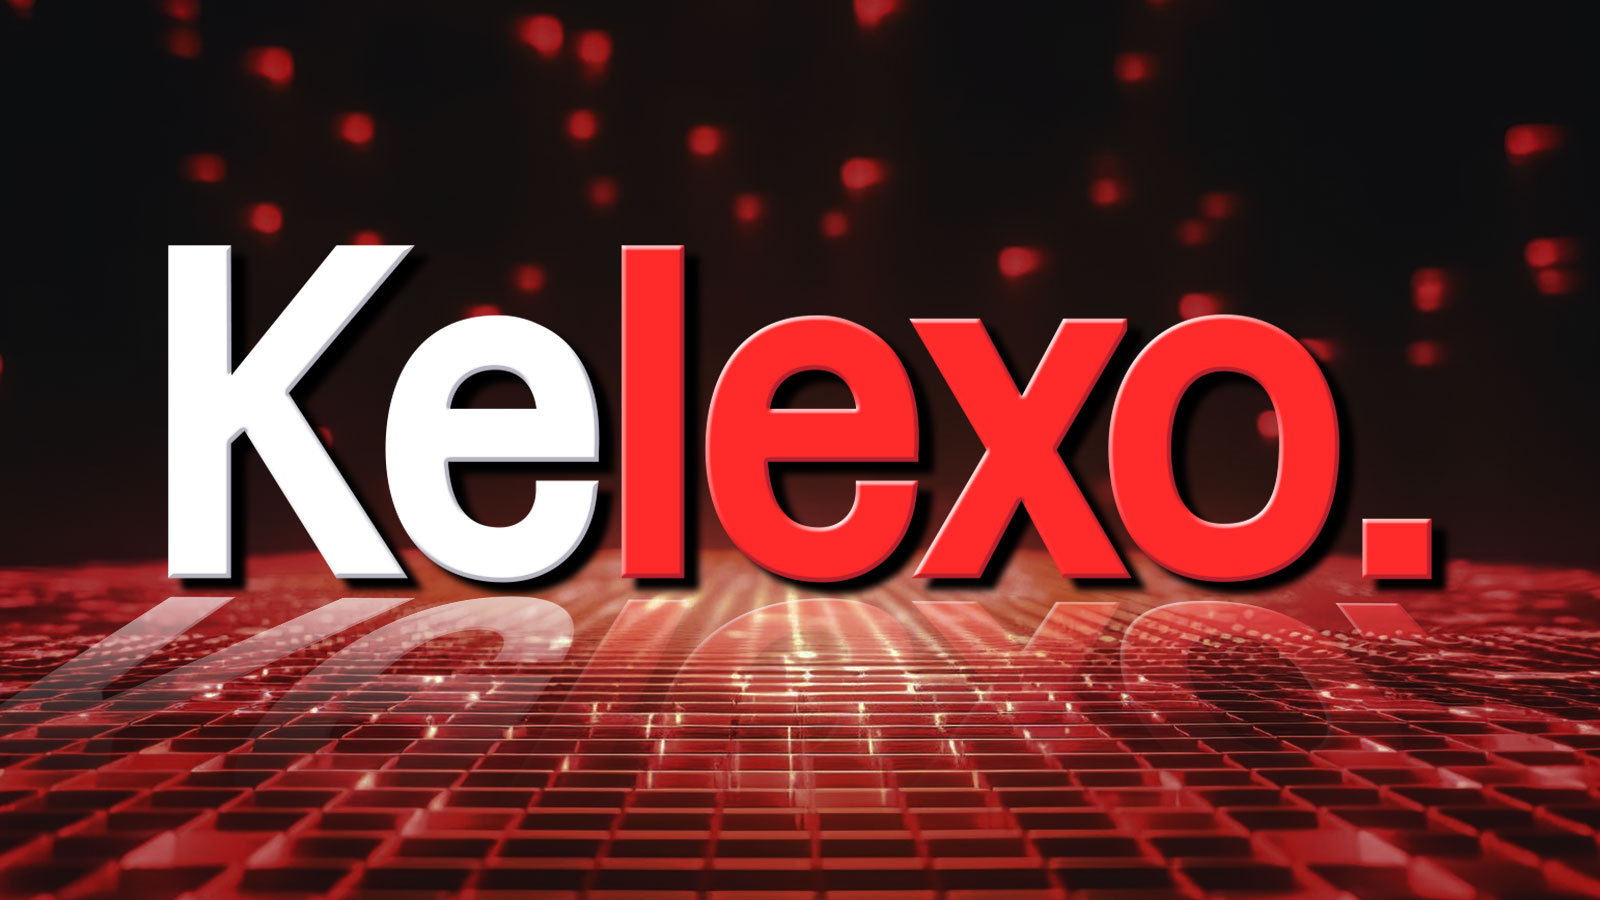 Kelexo (KLXO) Token Sale Welcomed by Crypto Investors in Late Q1 while Cosmos (ATOM) and Dogecoin (DOGE) In Focus for Altcoiners